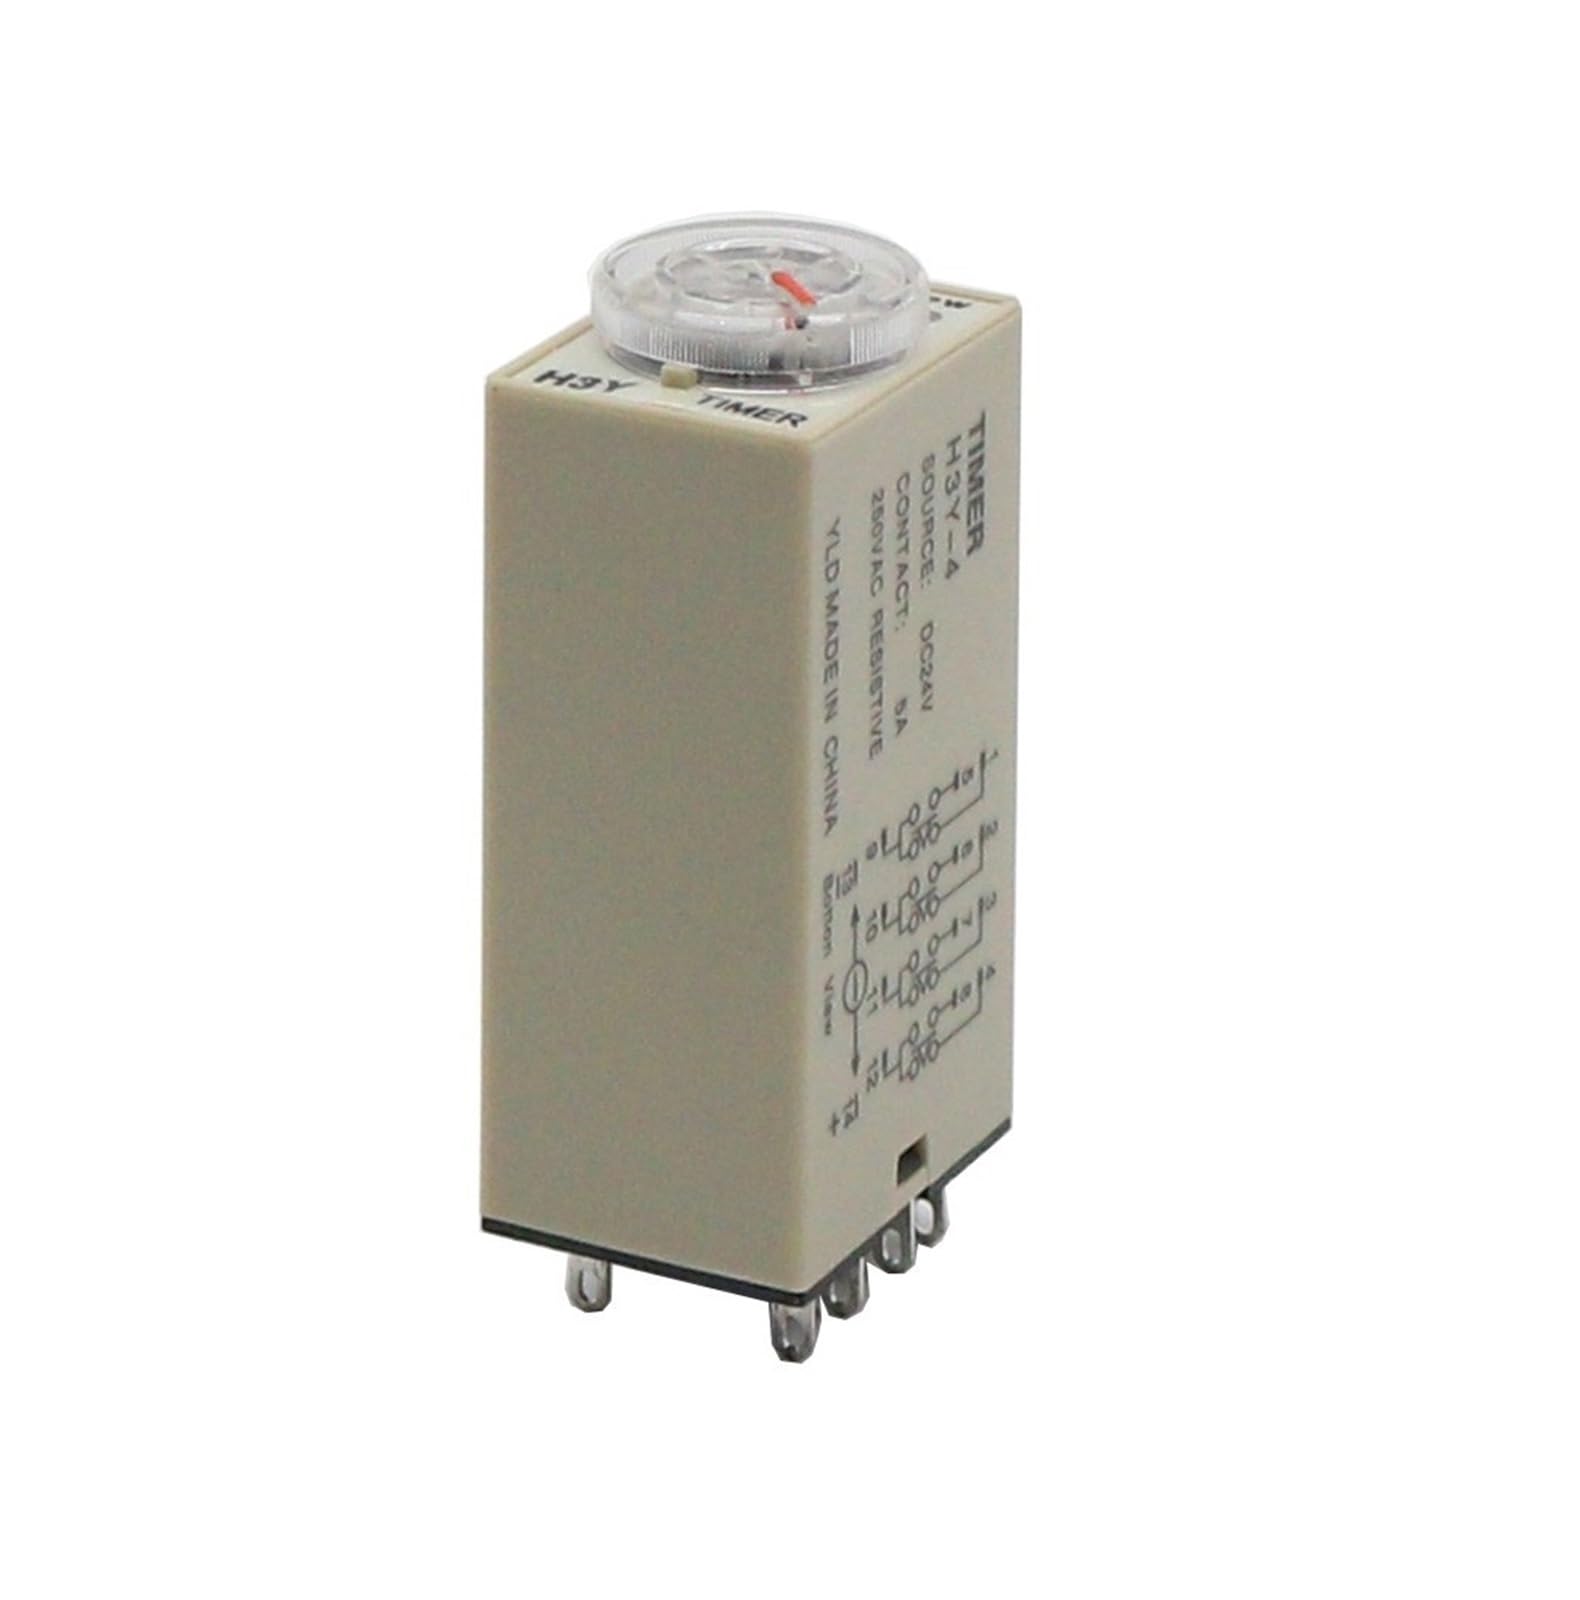 1pcs Power on Delay Time Relay H3Y-4 Small 14-pinDC12V24vAC220v Timer Switch 1S 3S 5S 30S 60S 5M 10M 30M 60M OSBCMZGE(DC 24V,H3Y-4 30Sec) von OSBCMZGE